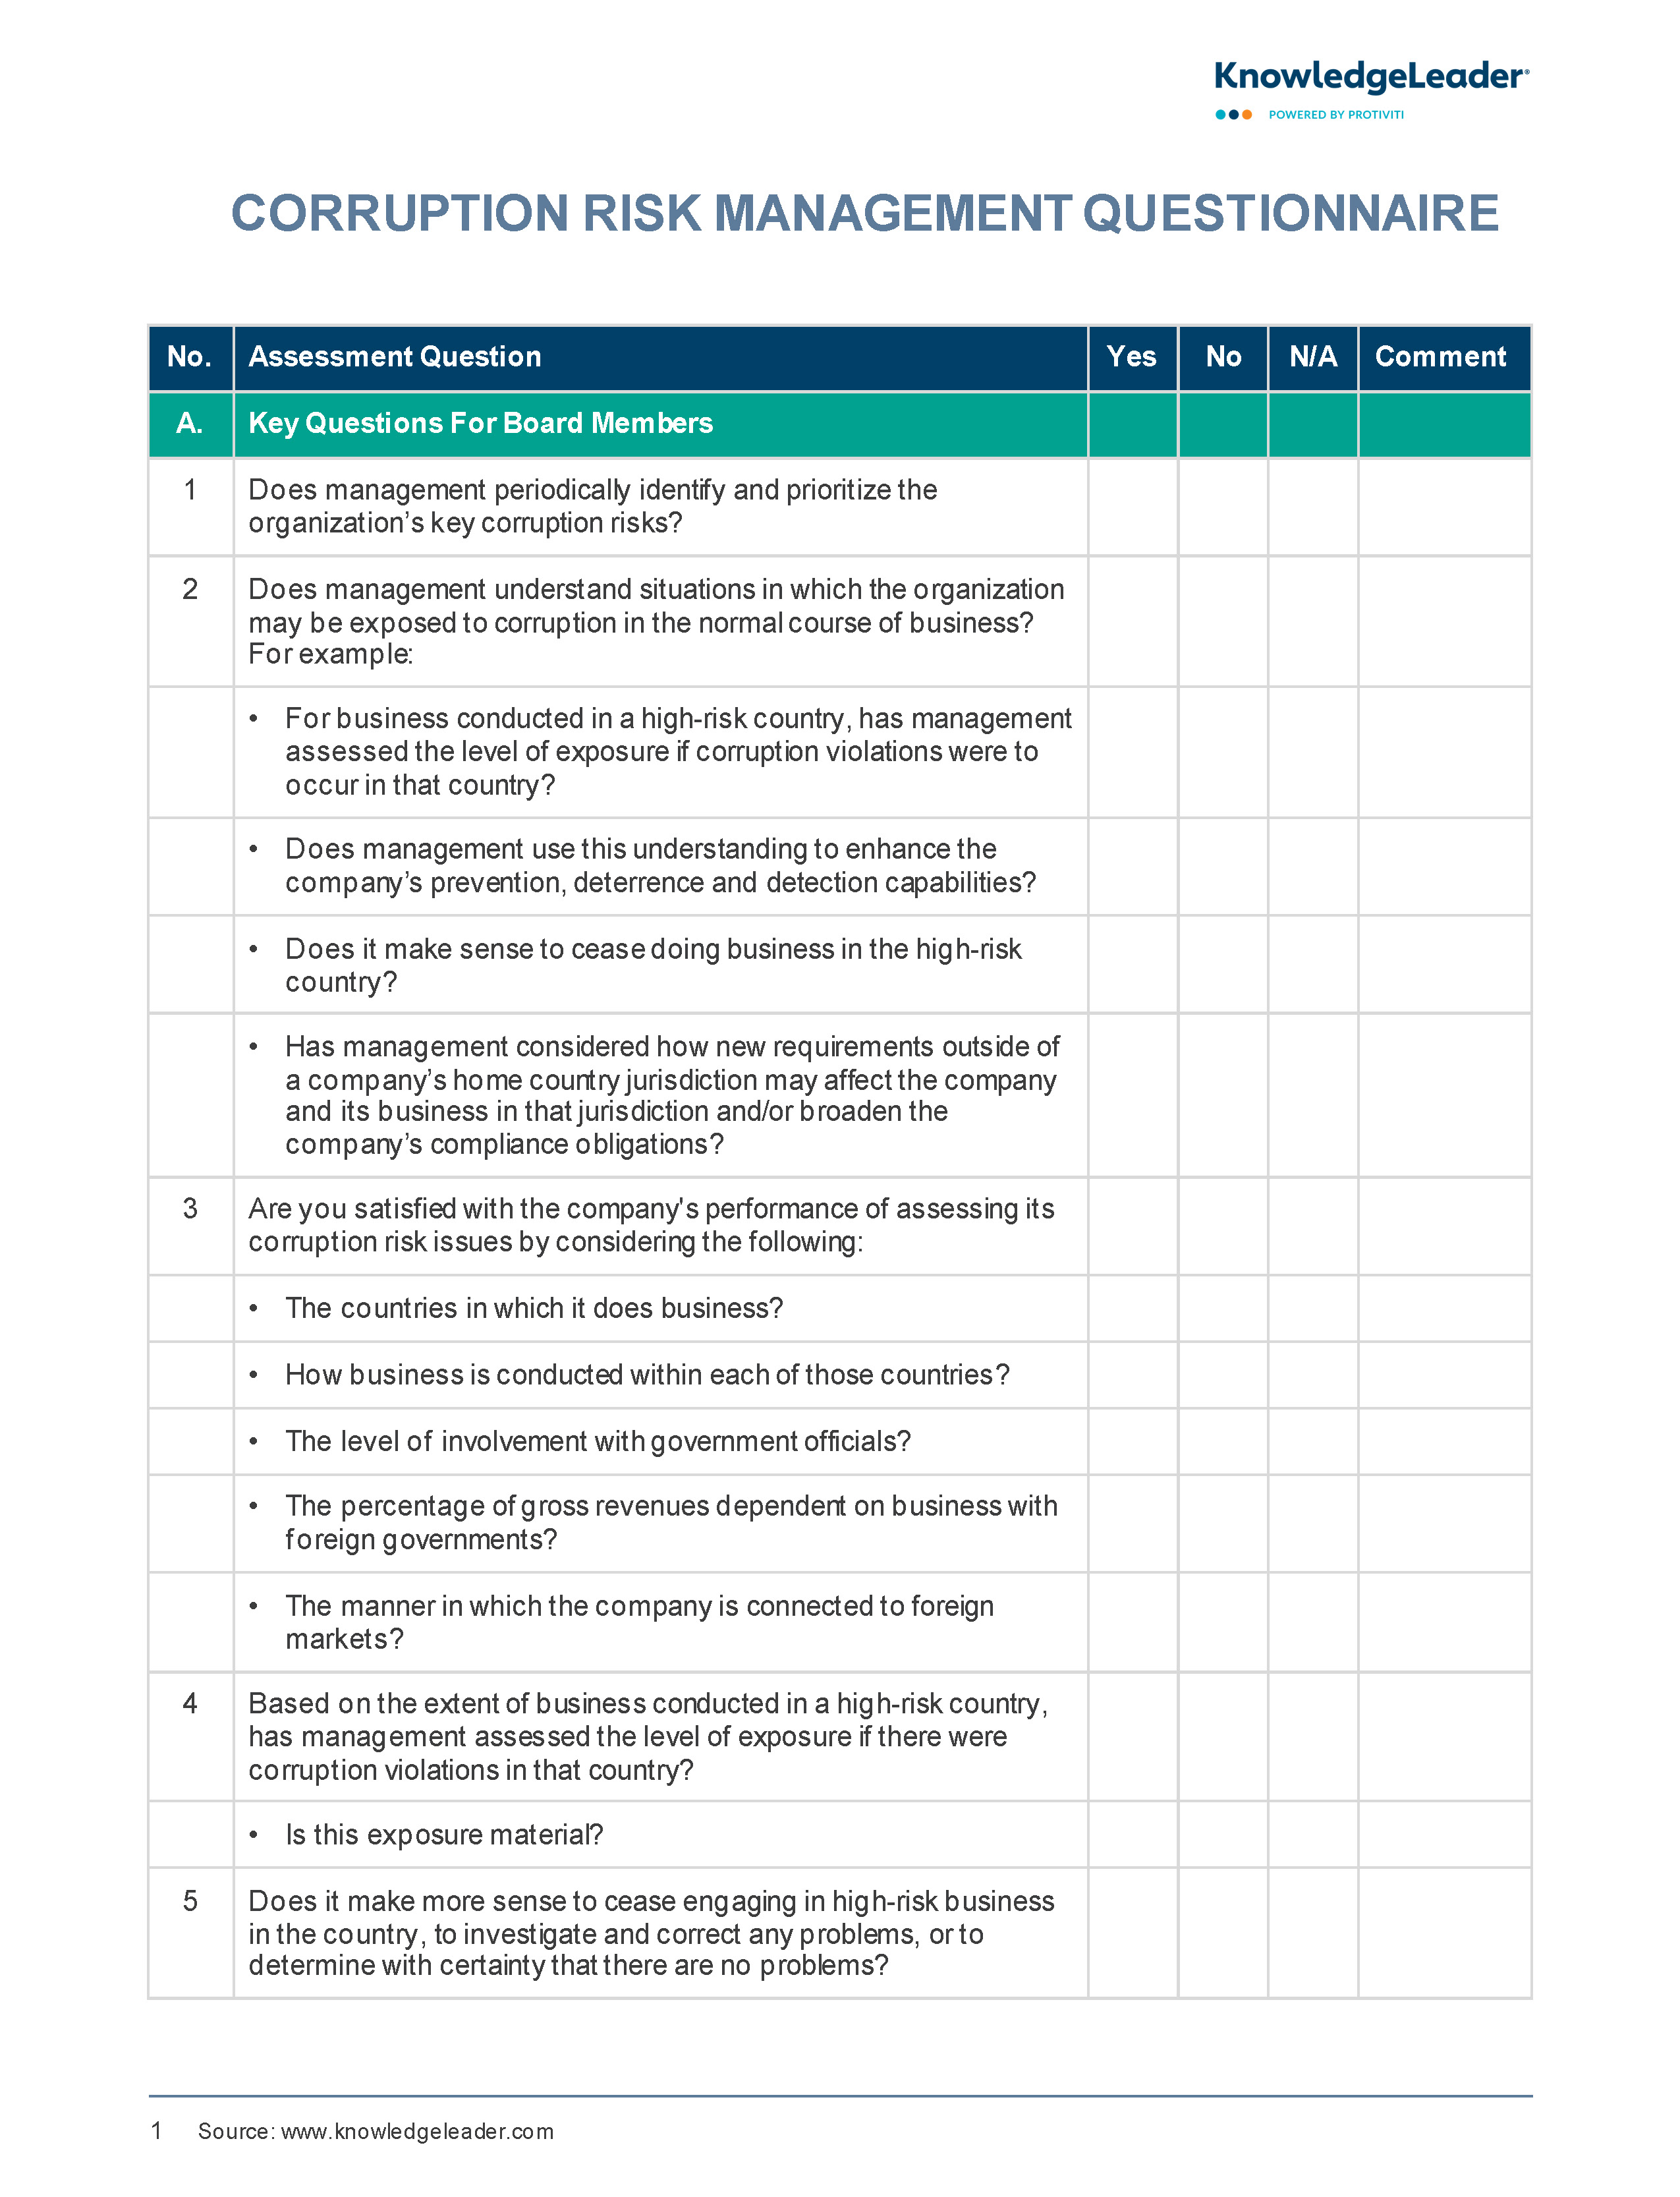 Screenshot of the first page of Corruption Risk Management Questionnaire